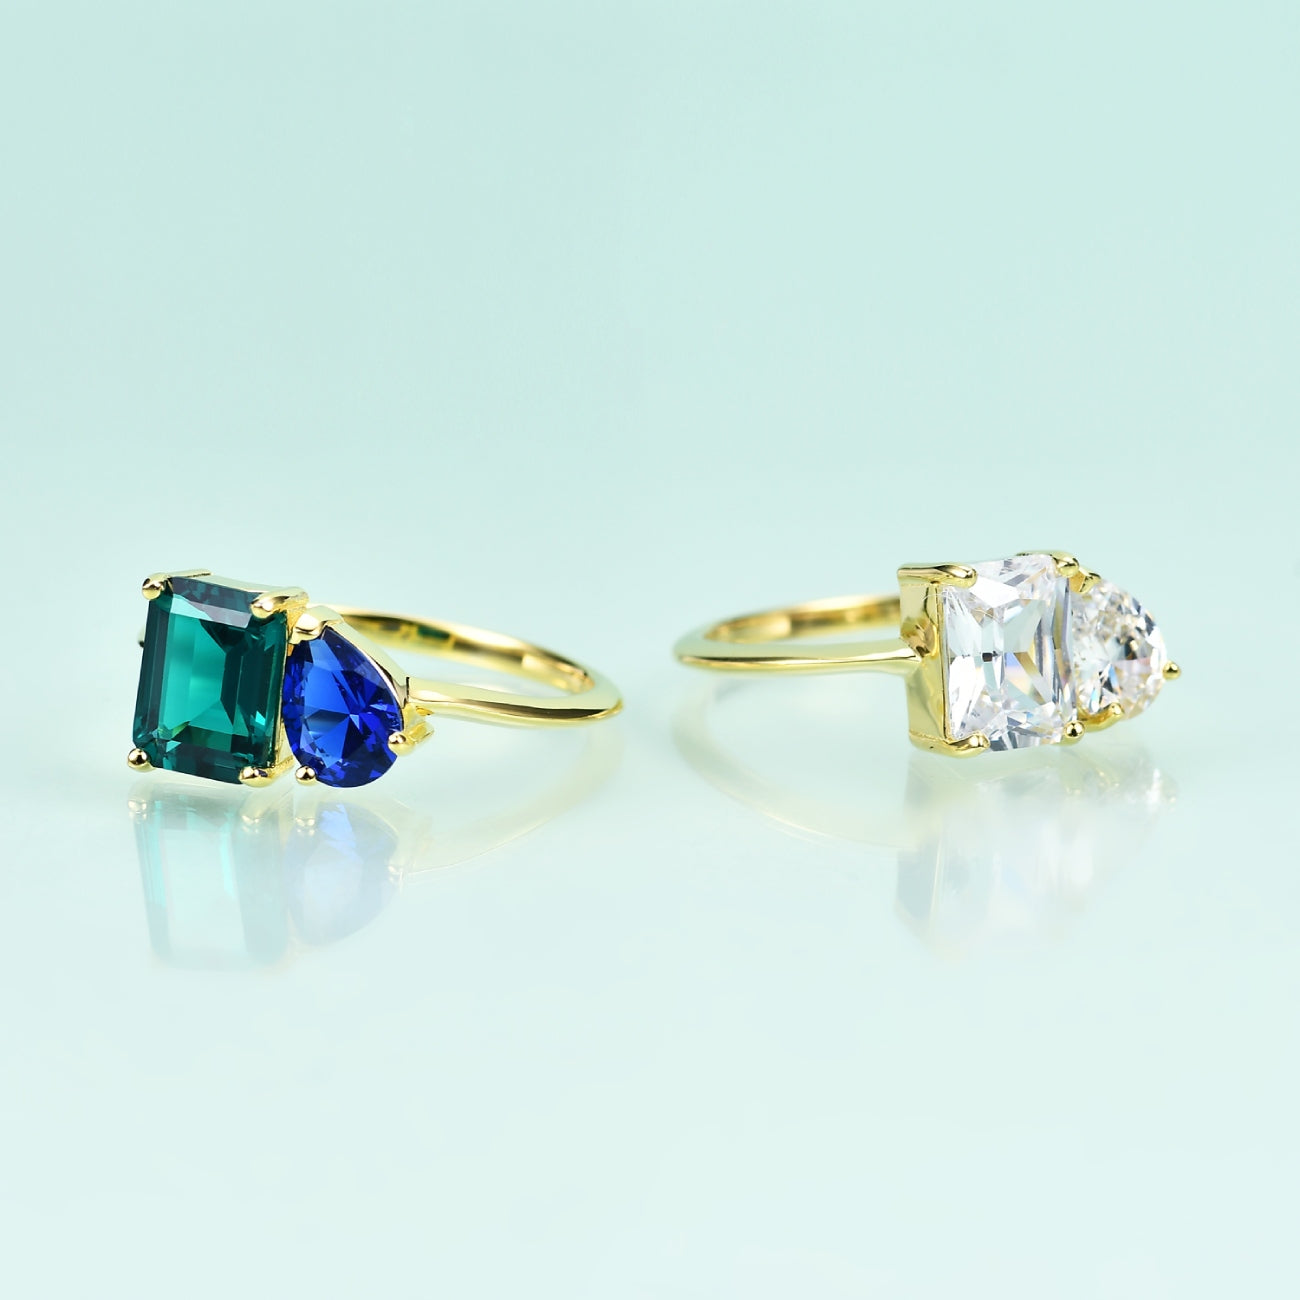 Toi et moi ring emerald and sapphire Rosery Poetry